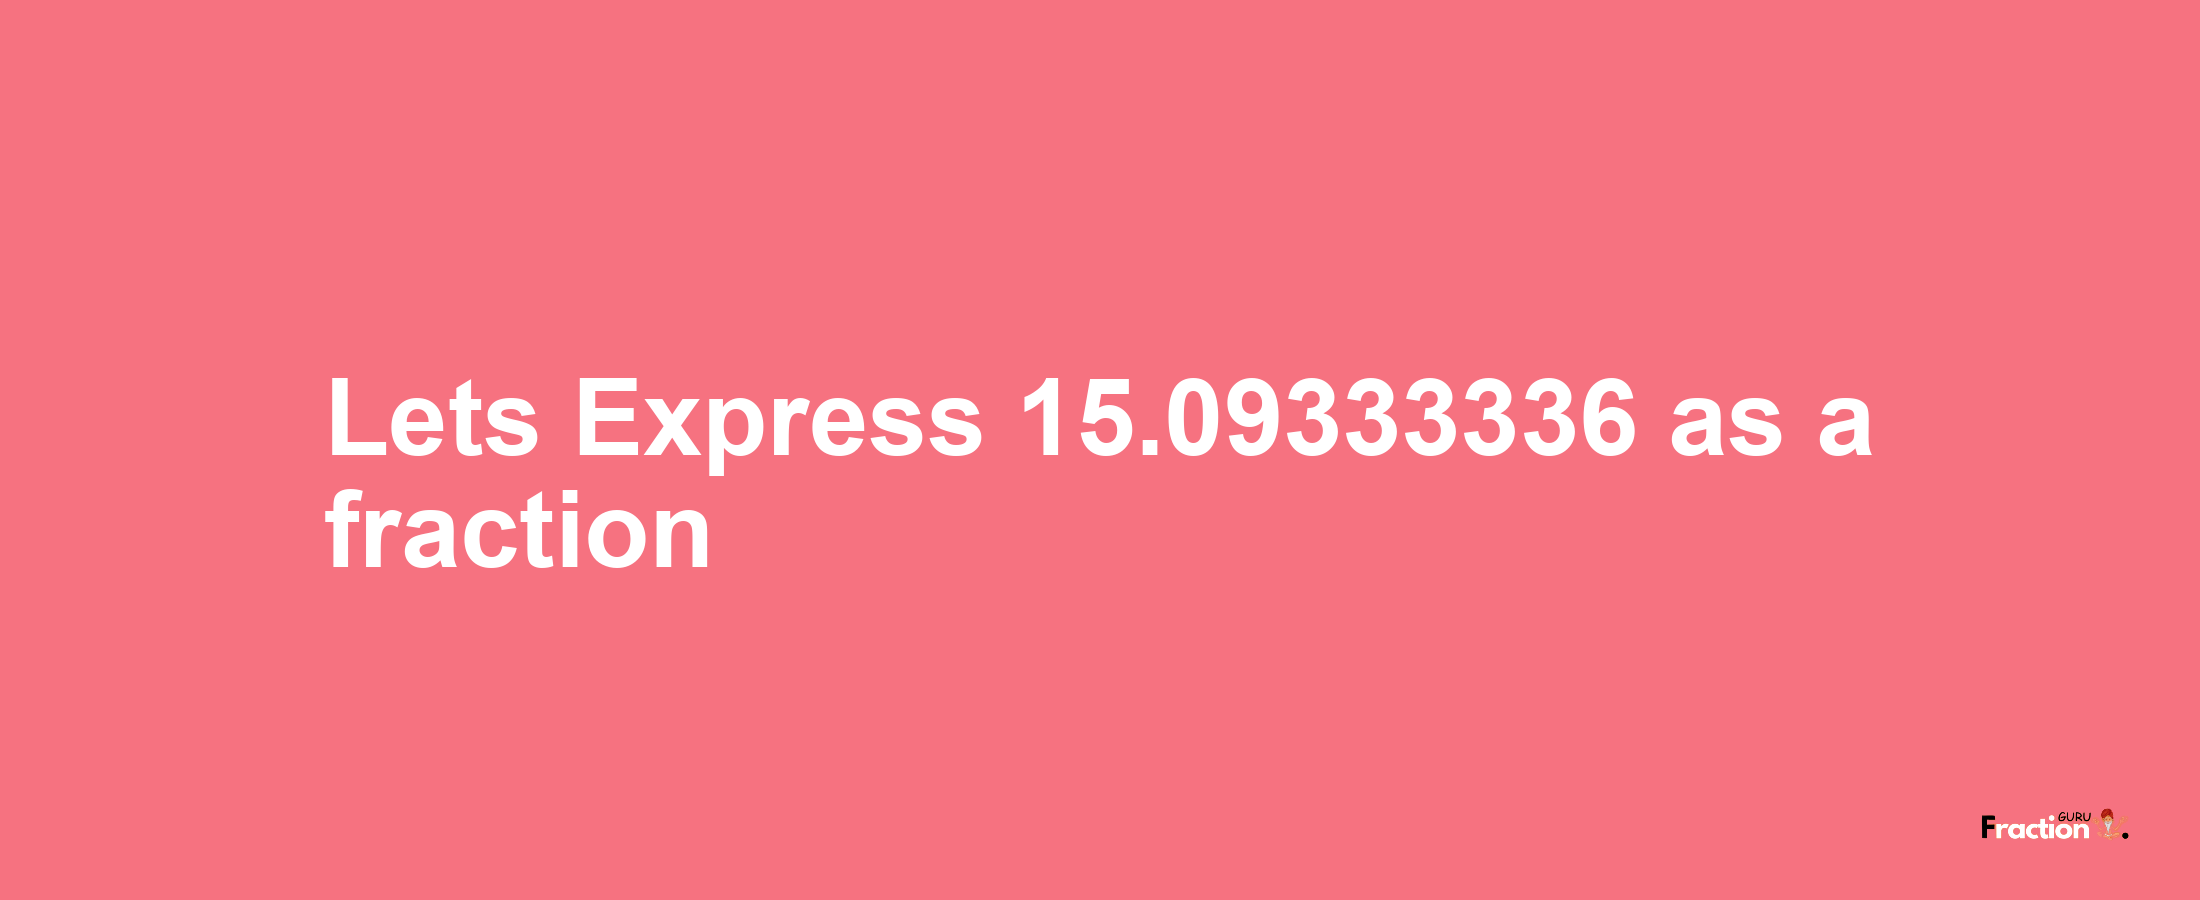 Lets Express 15.09333336 as afraction